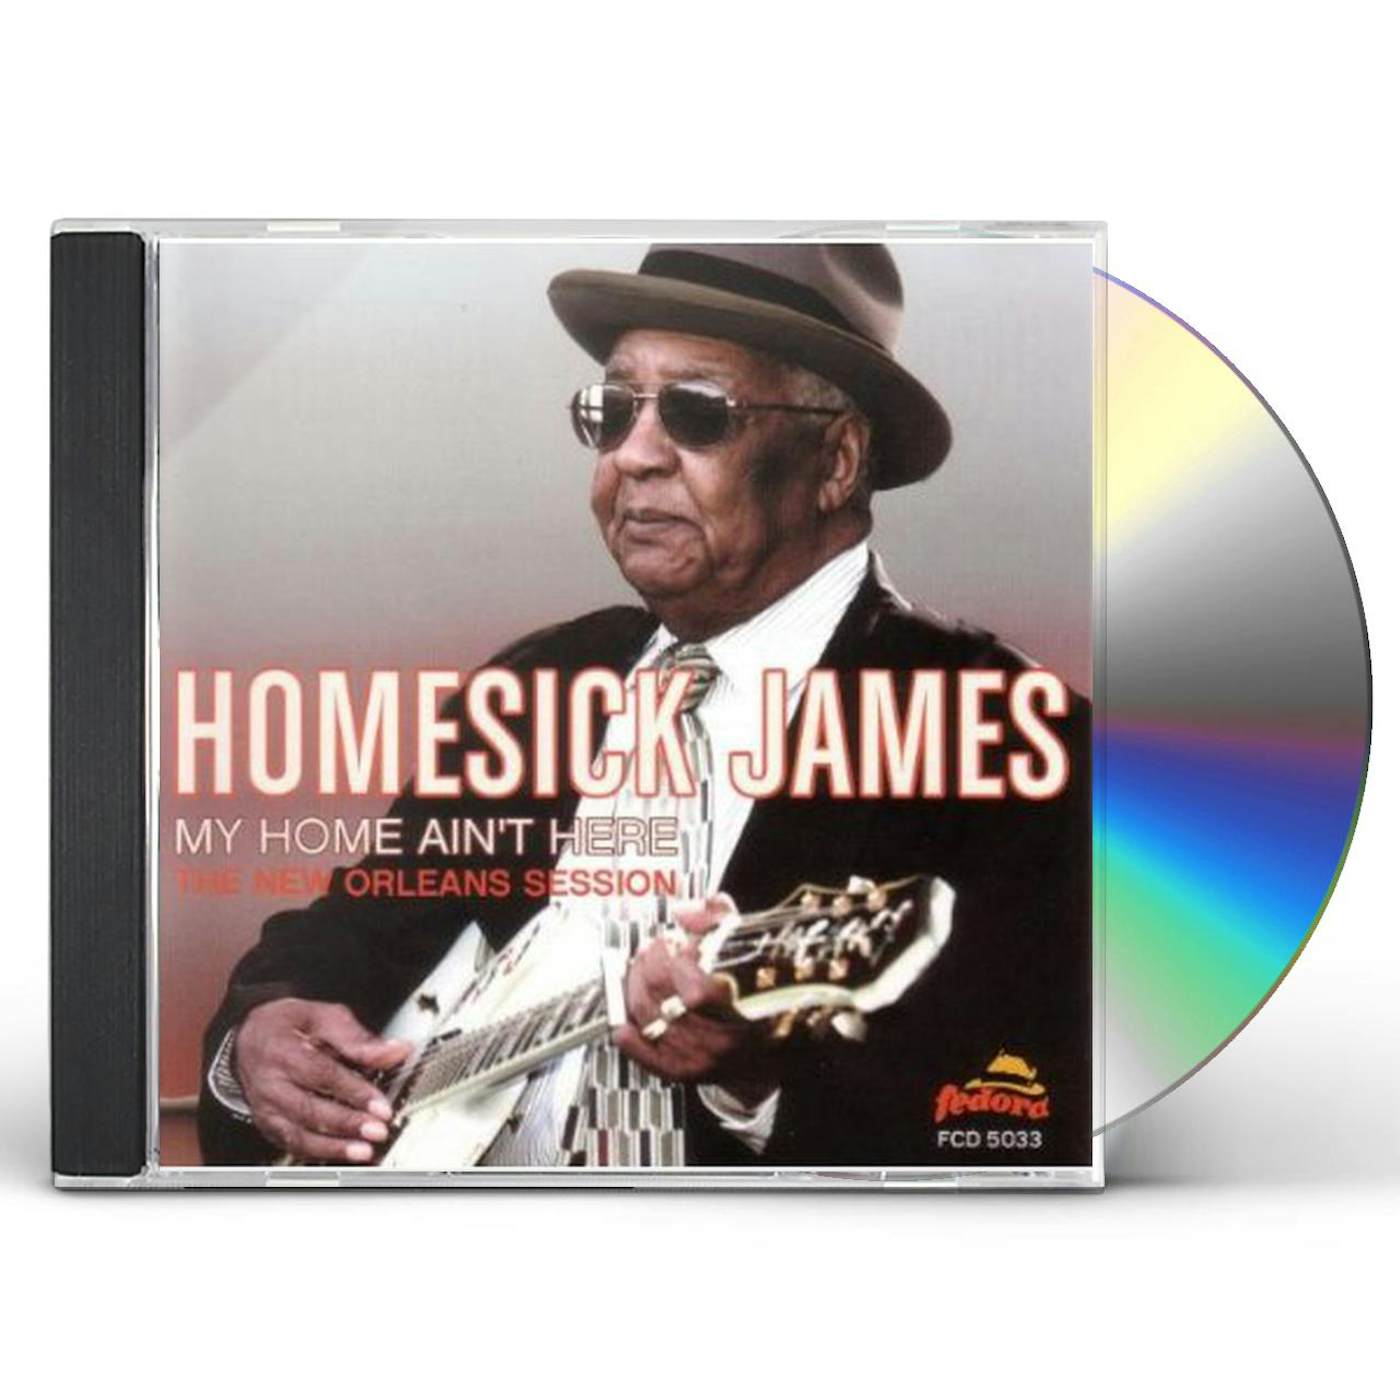 Homesick James MY HOME AIN'T HERE: THE NEW ORLEANS SESSION CD